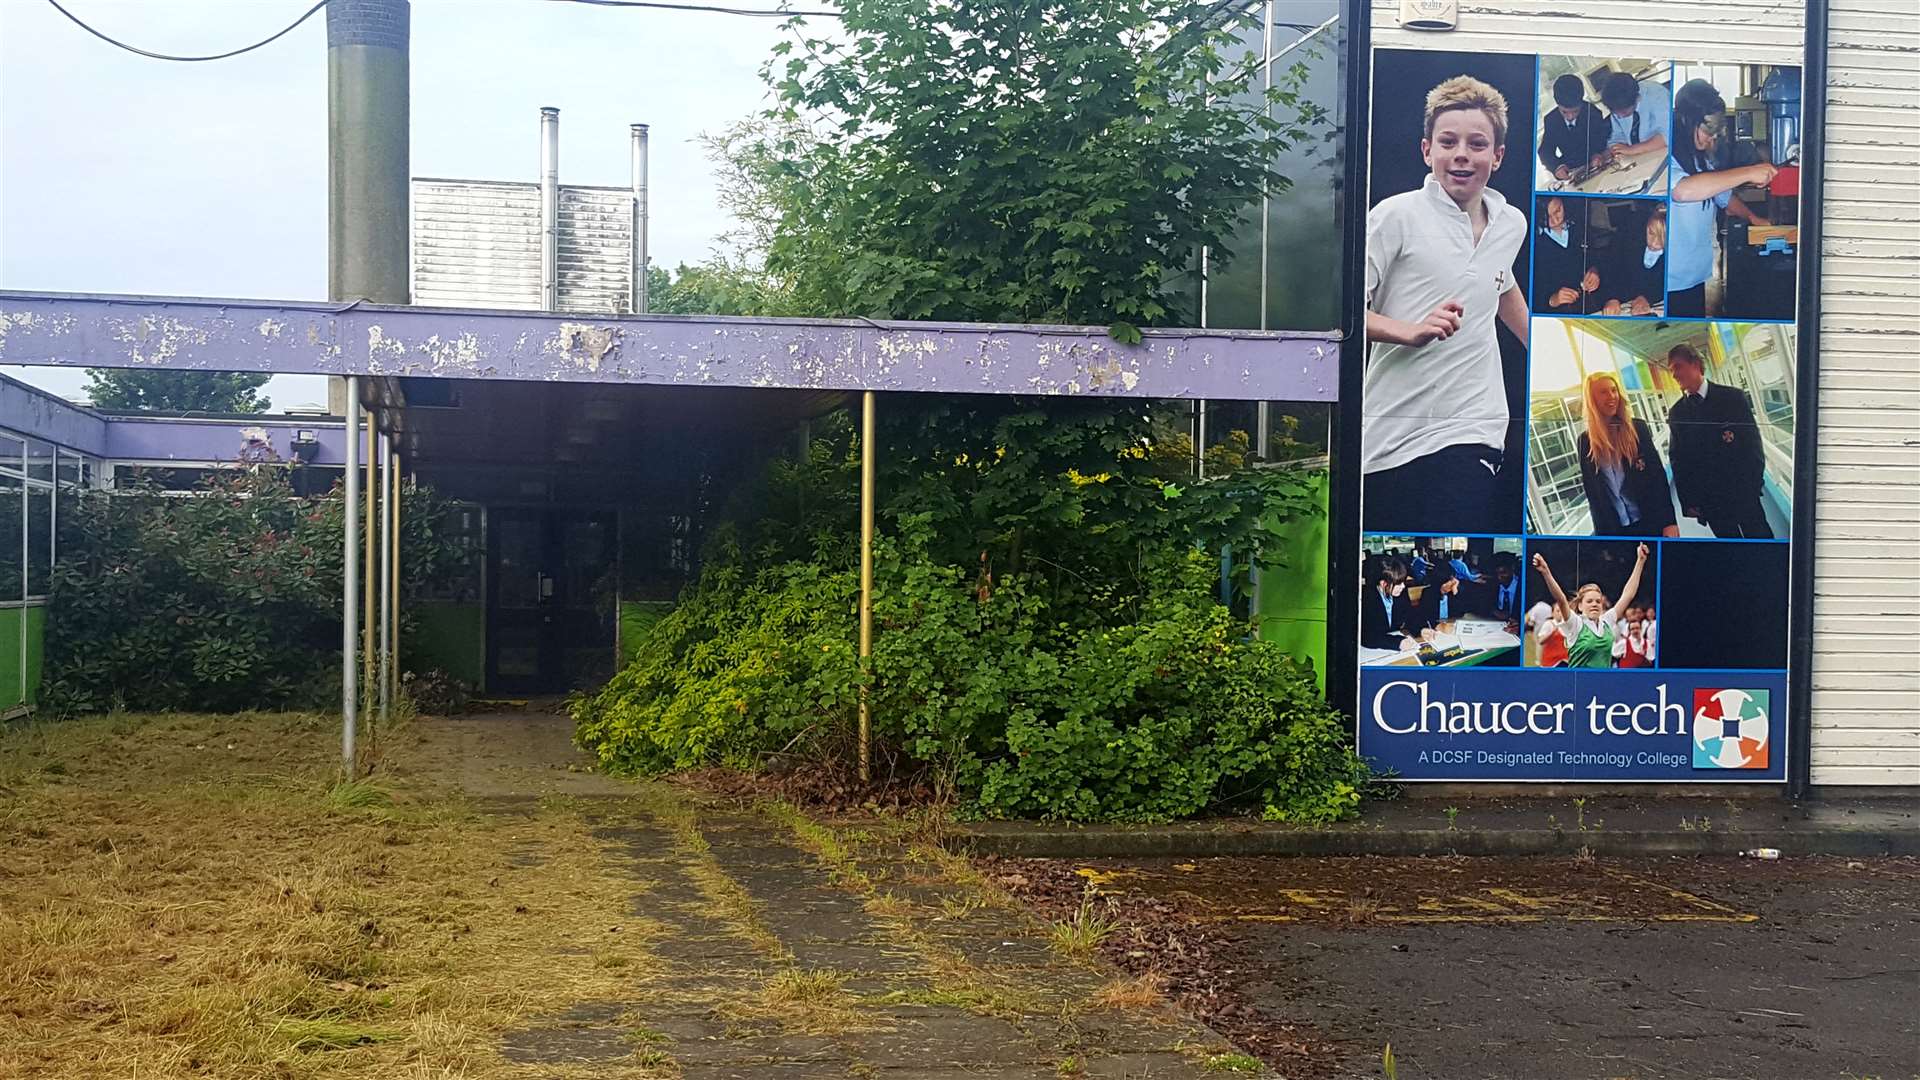 Demolition work is set to begin at the Chaucer School site next month